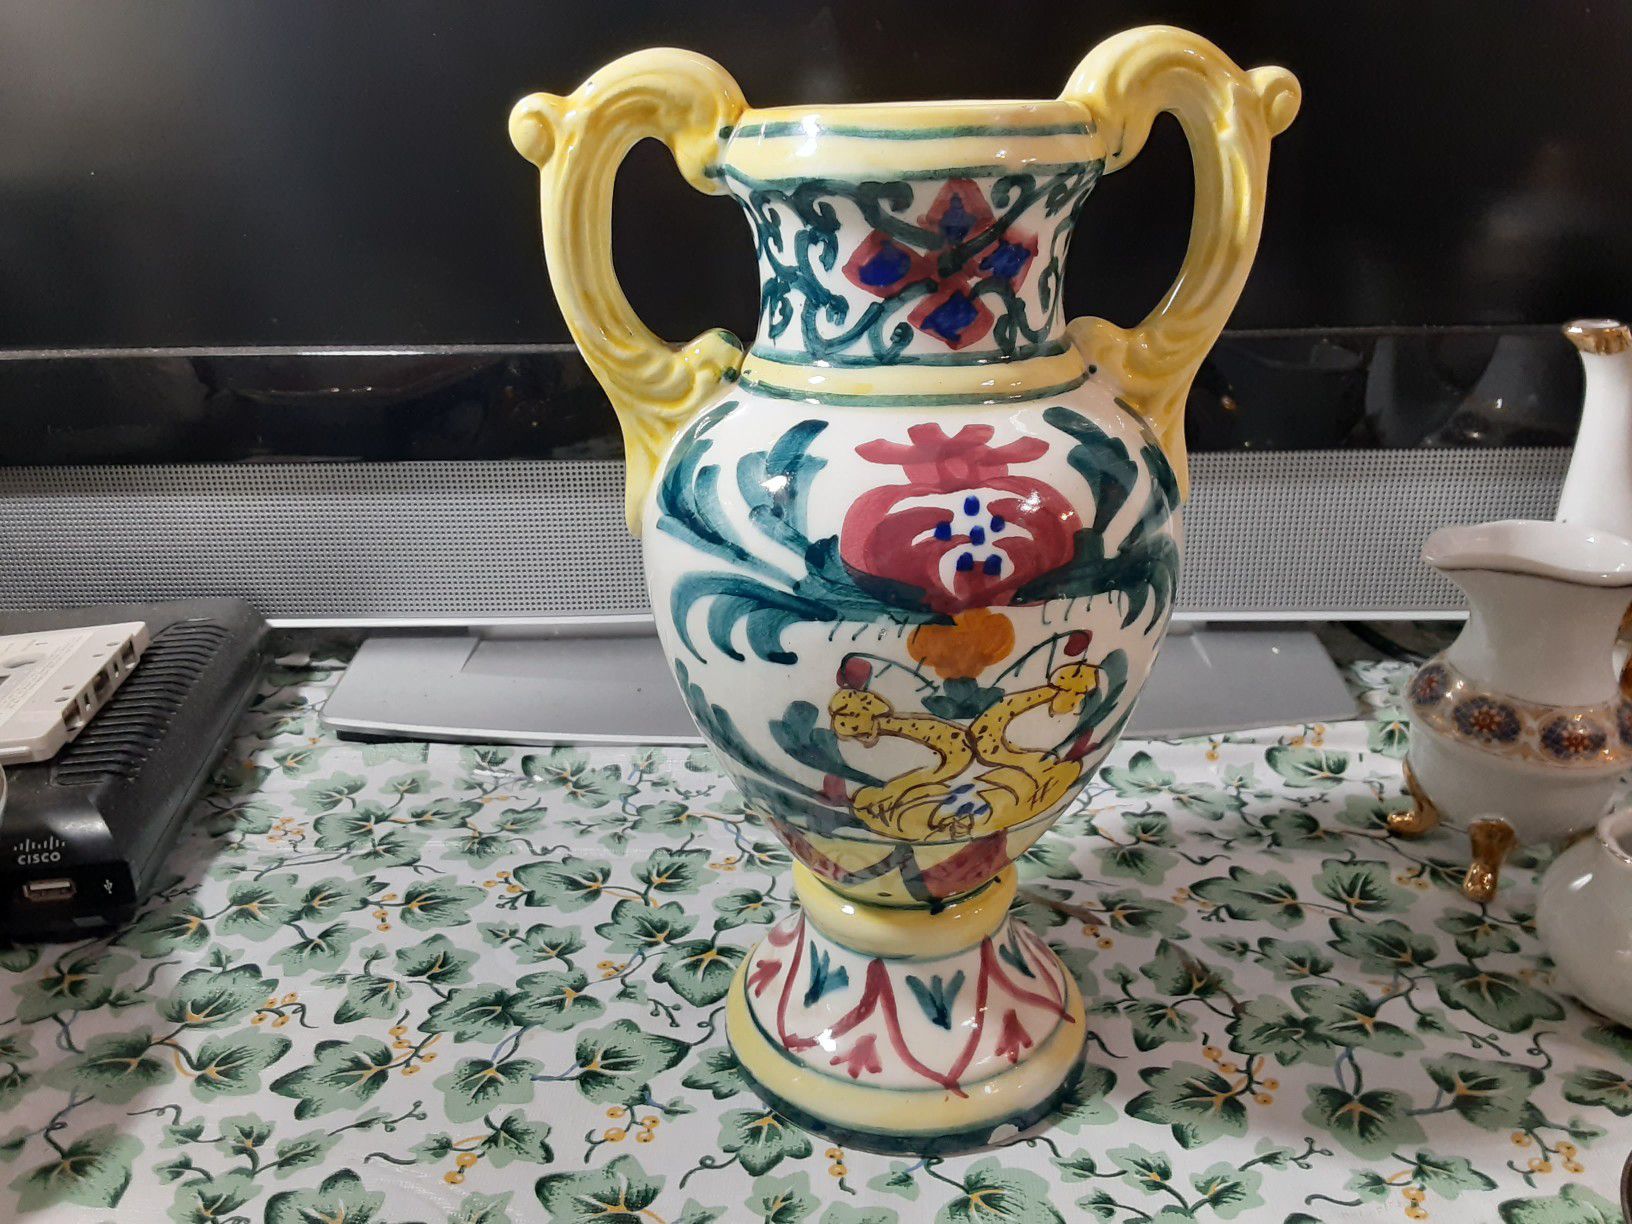 VERY UNIQUE AND COLORFUL VASE 9,5INCHES Tall